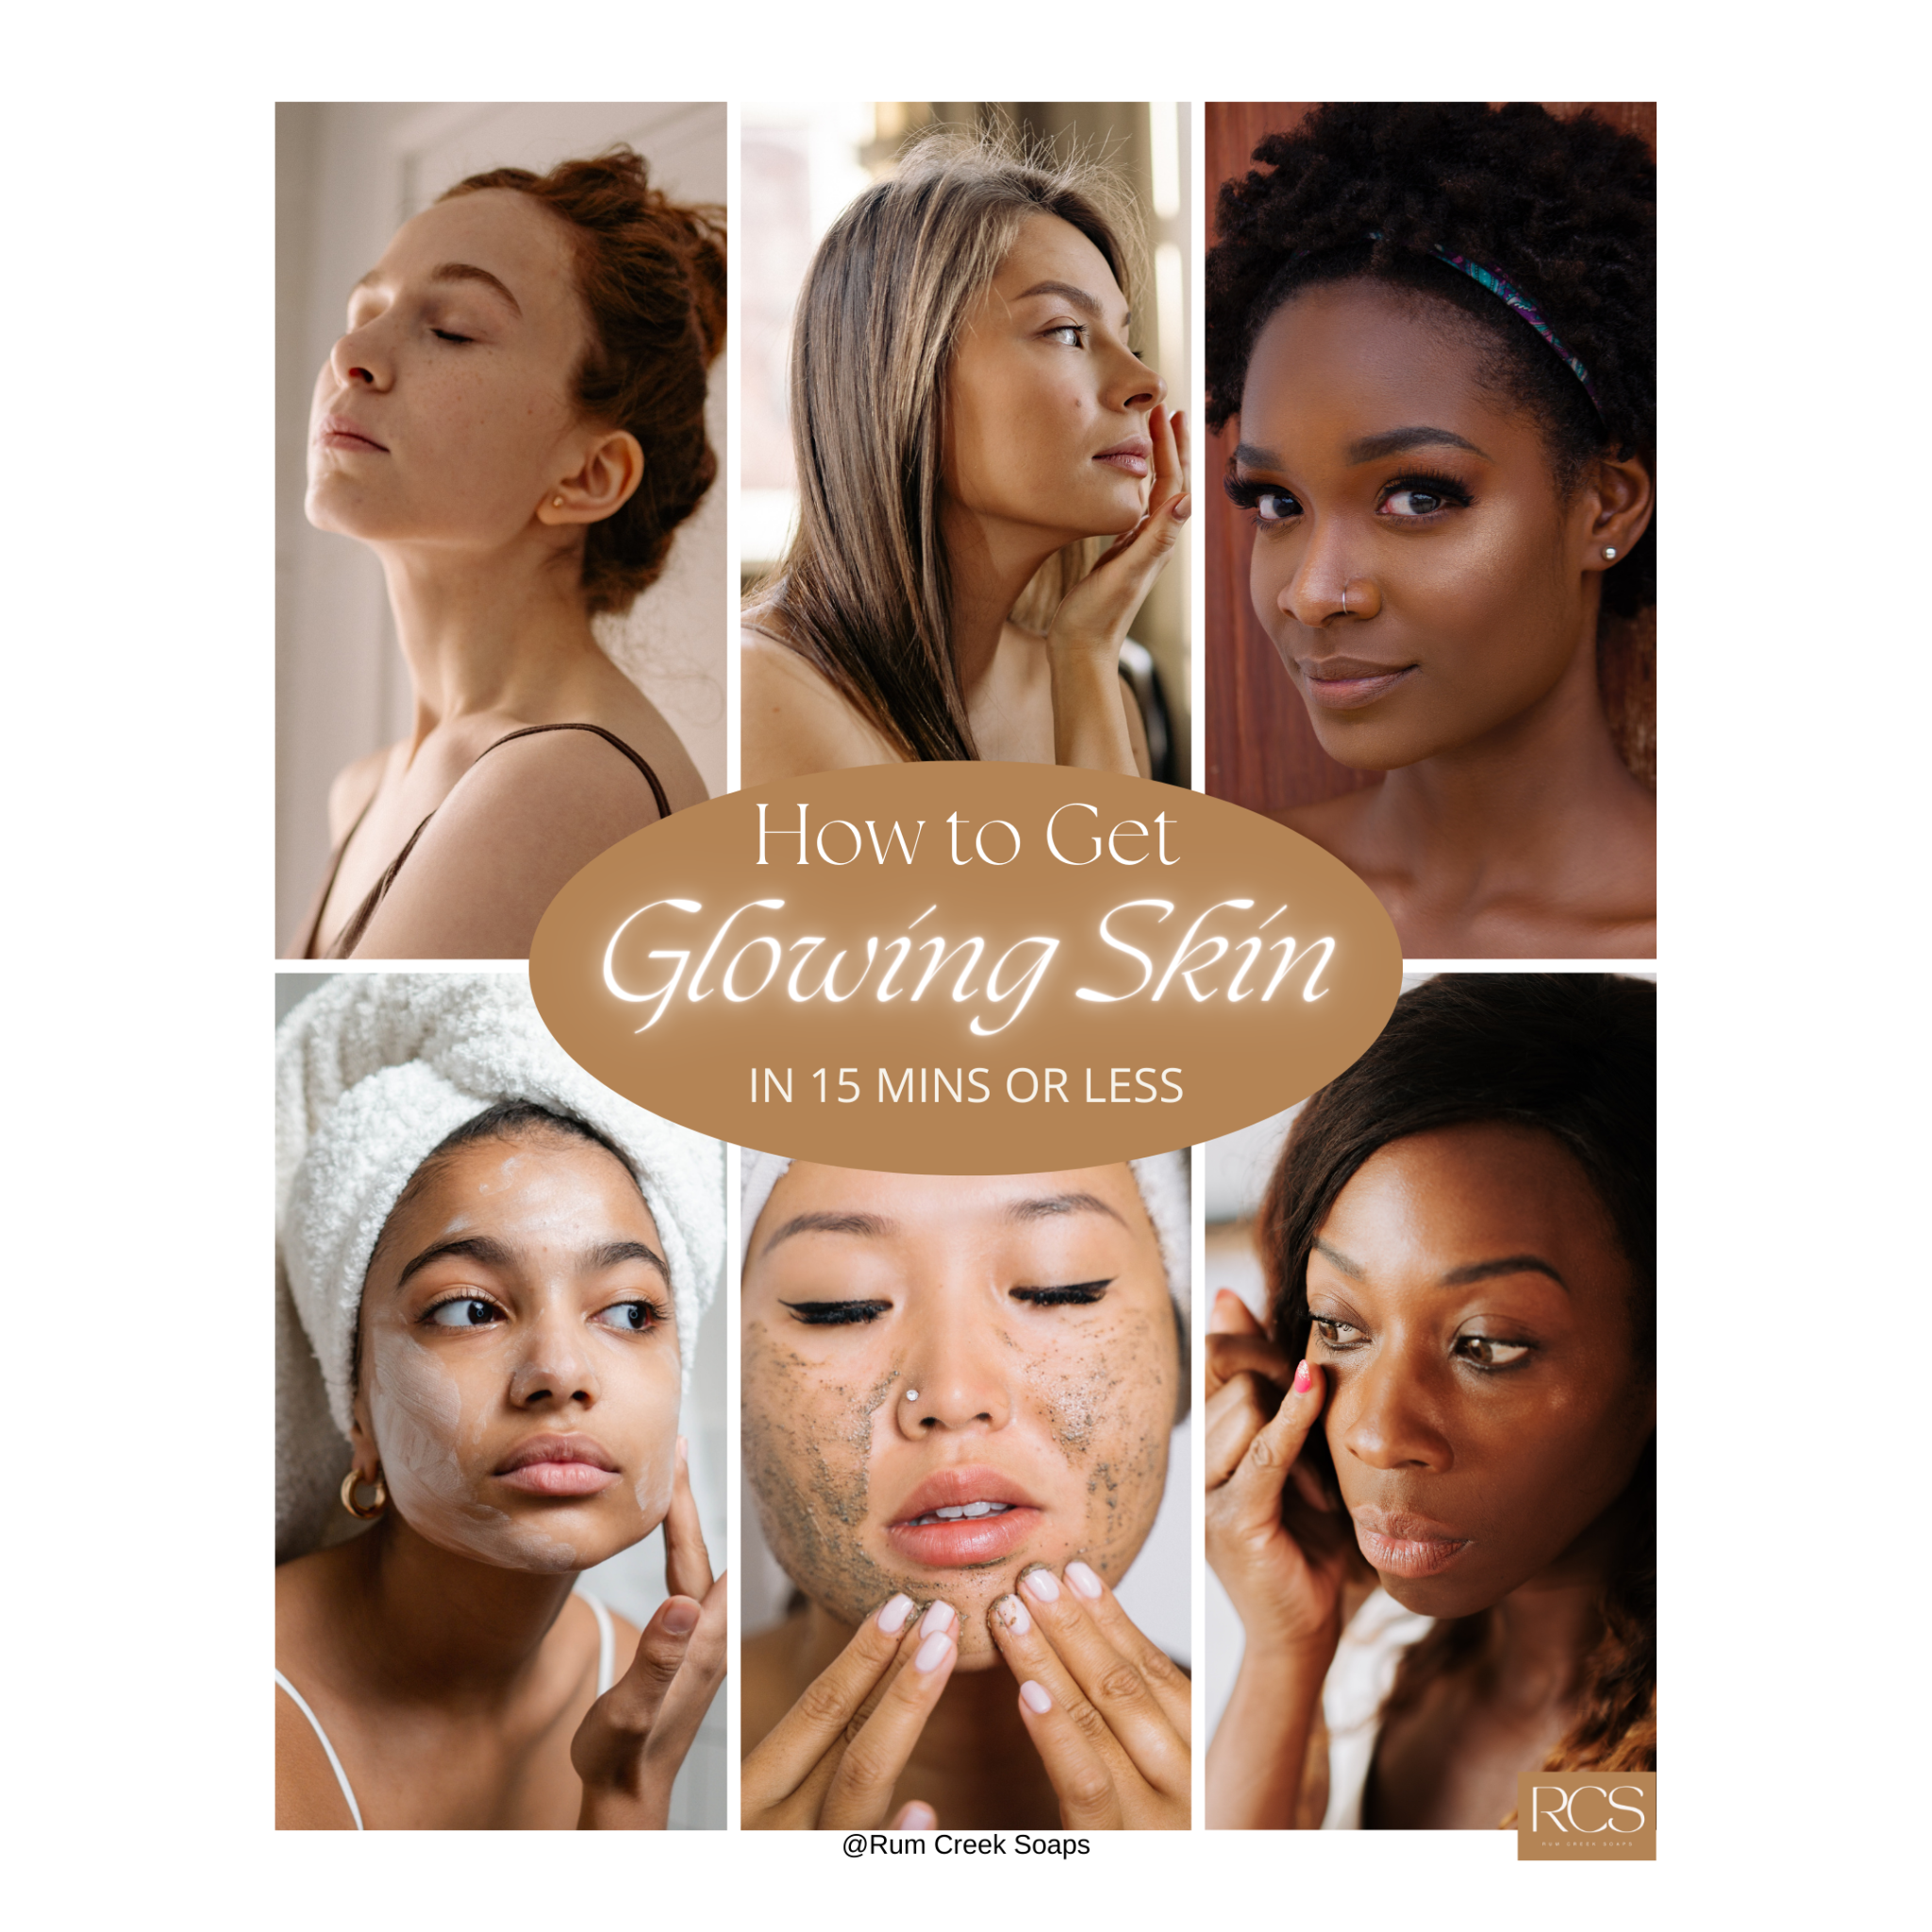 How To Get Glowing Skin in 15 Min or Less Skincare Guide